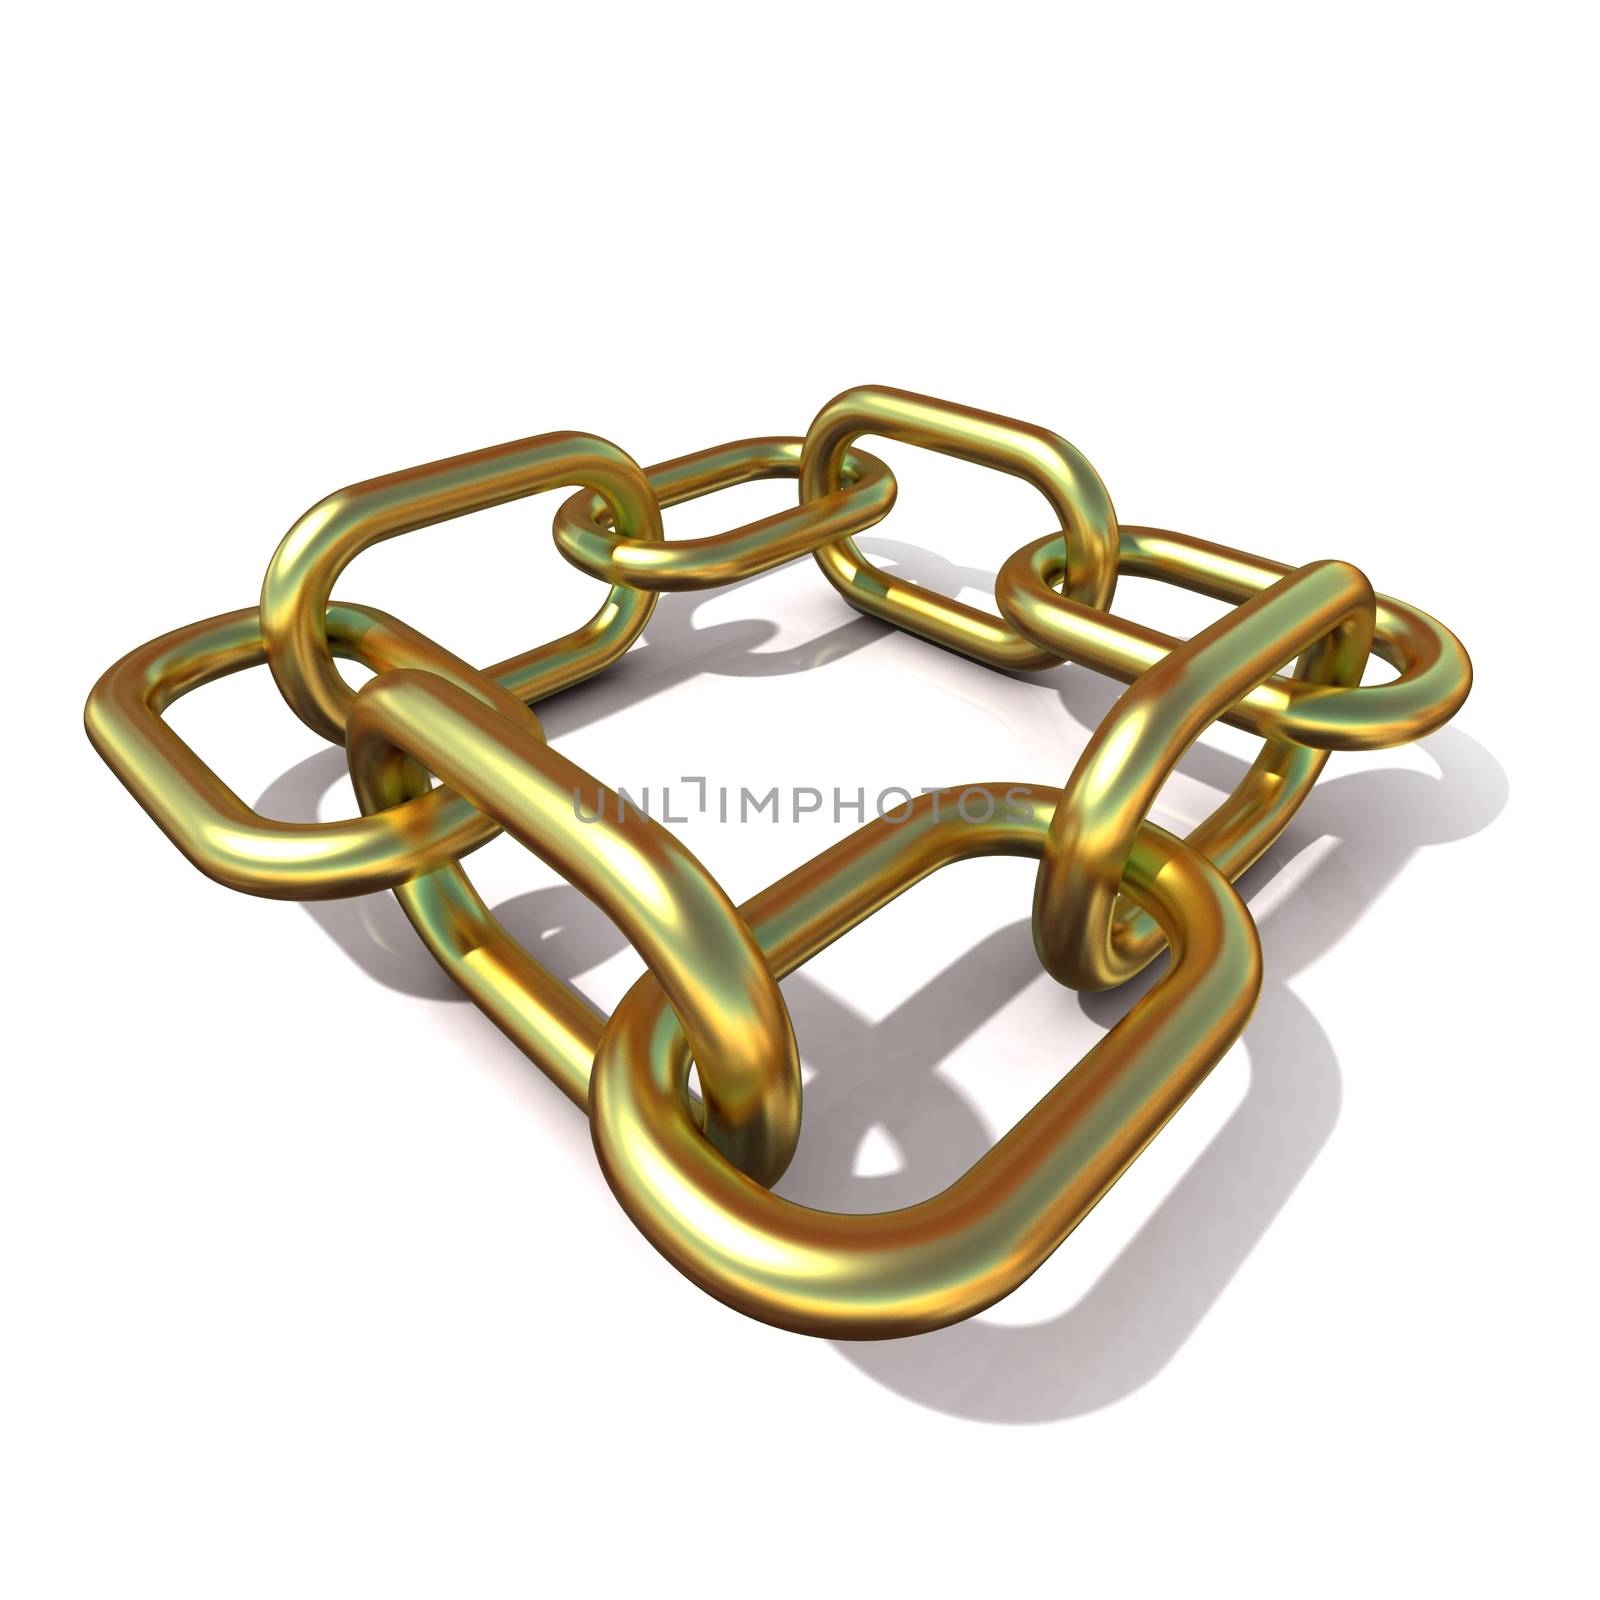 Abstract 3D illustration of a brass chain link isolated on white background. Front view